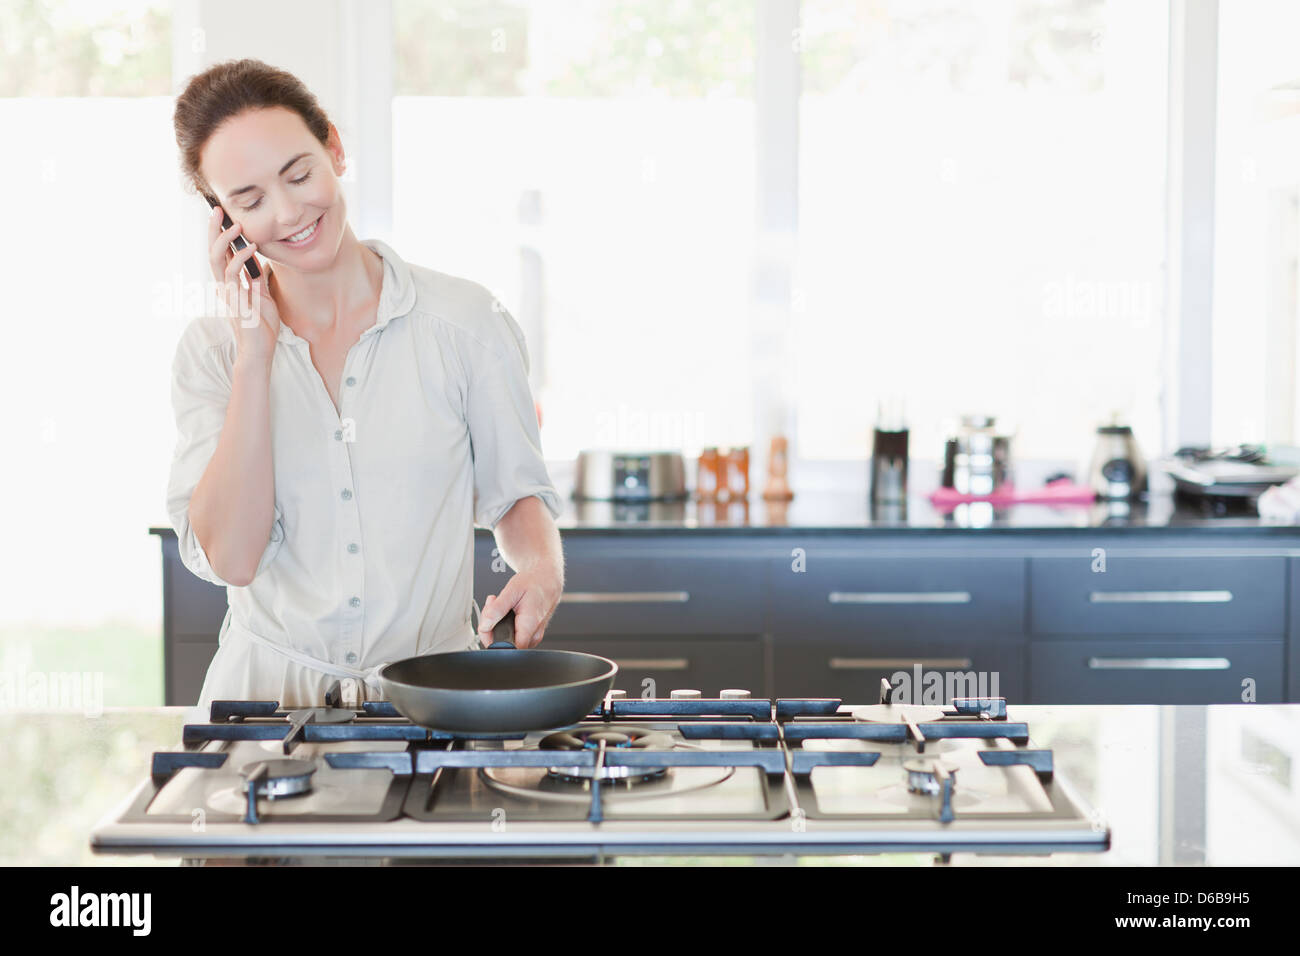 Woman on cell phone cooking Stock Photo